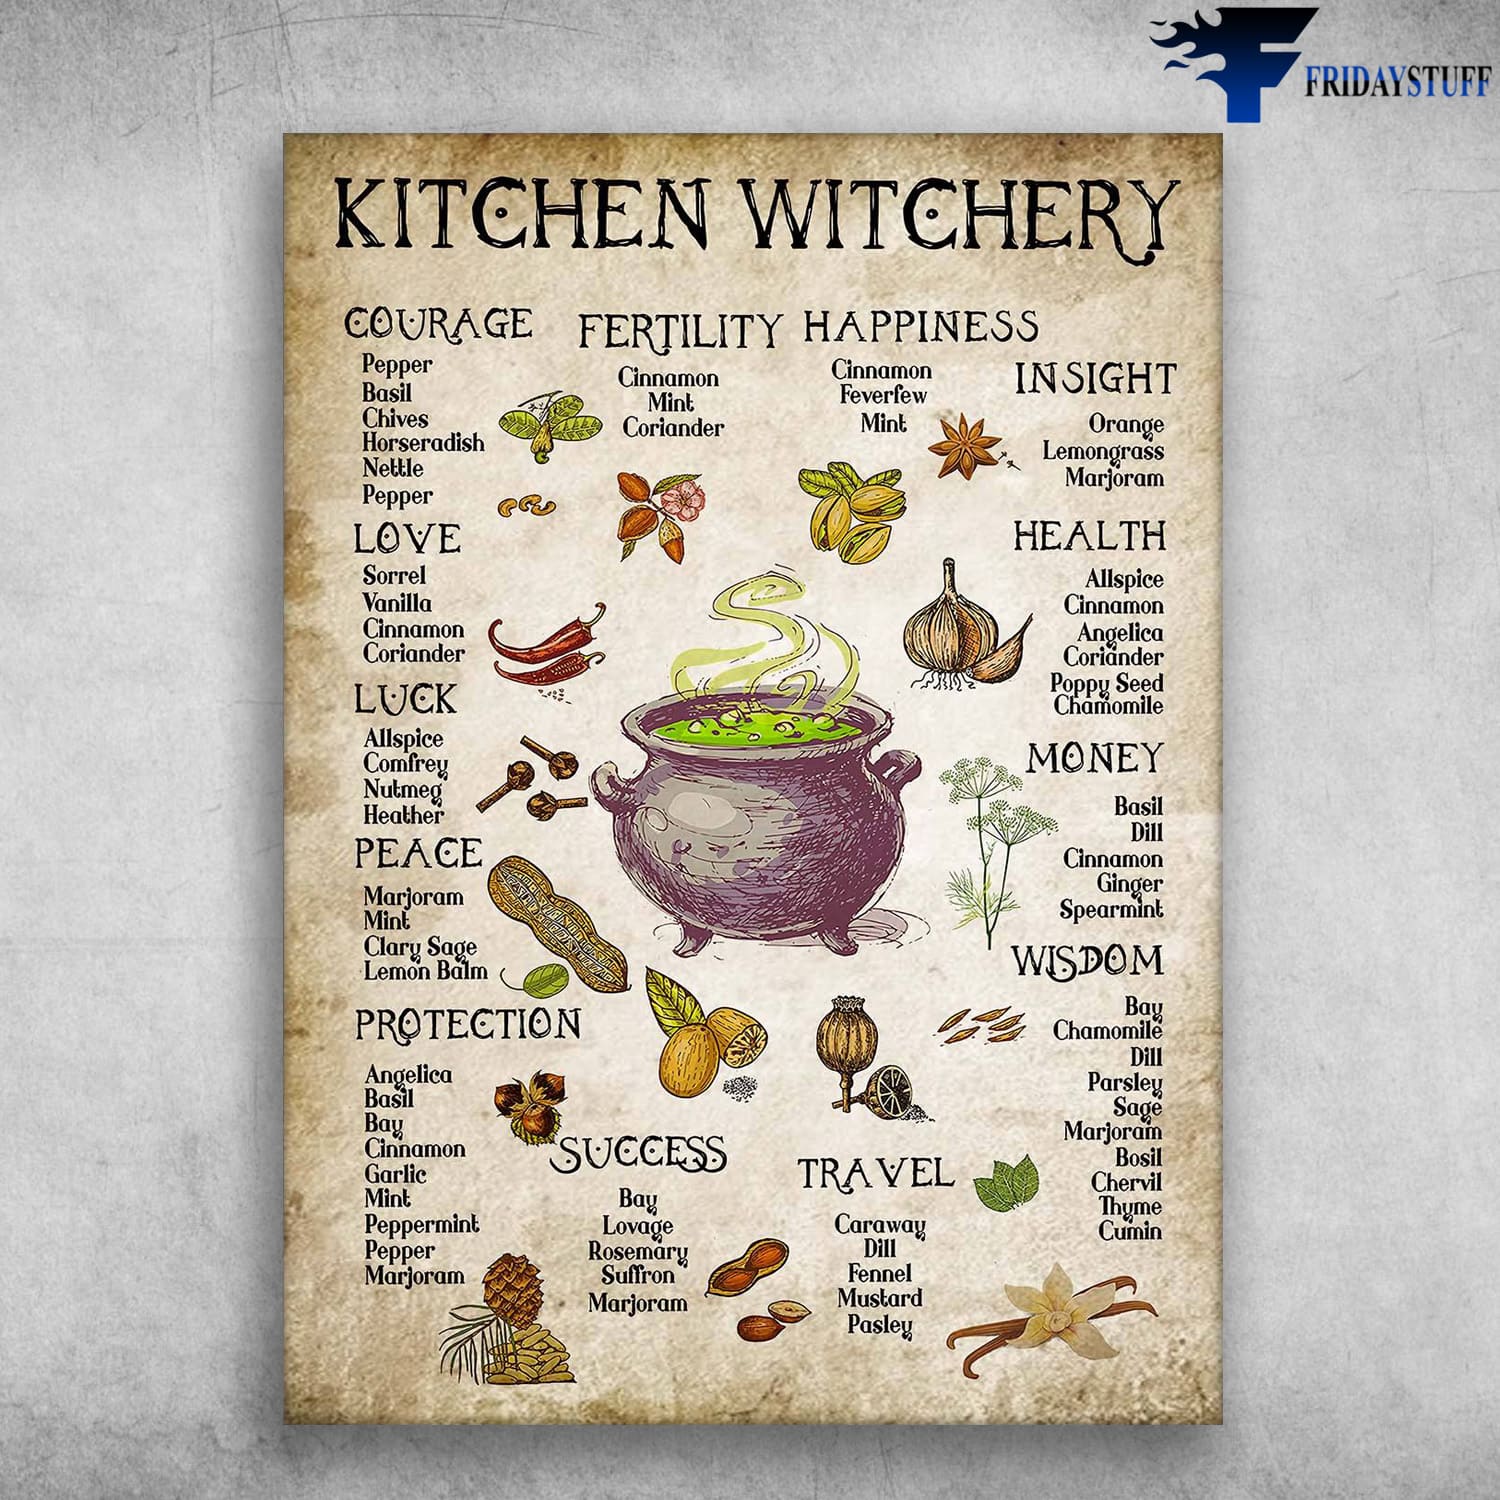 Kitchen Witchery, Courage, Fertility, Happiness, Insight, Health, Love, Luck, Protection